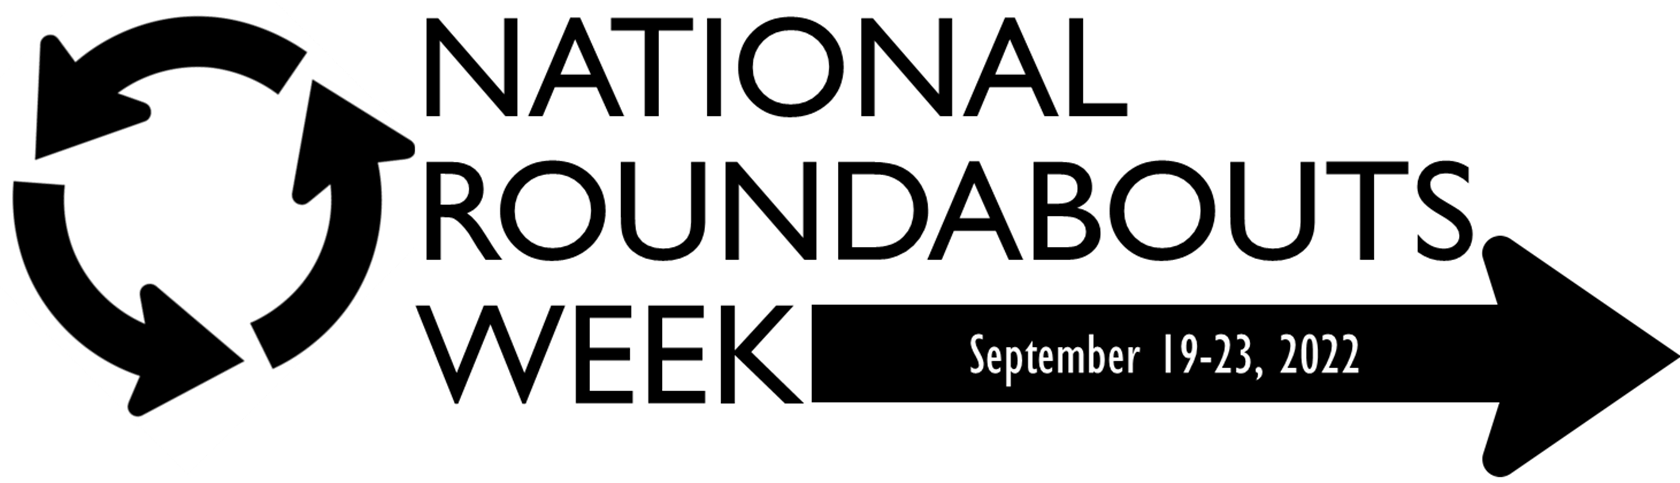 National Roundabouts Week - September 20-24, 2021